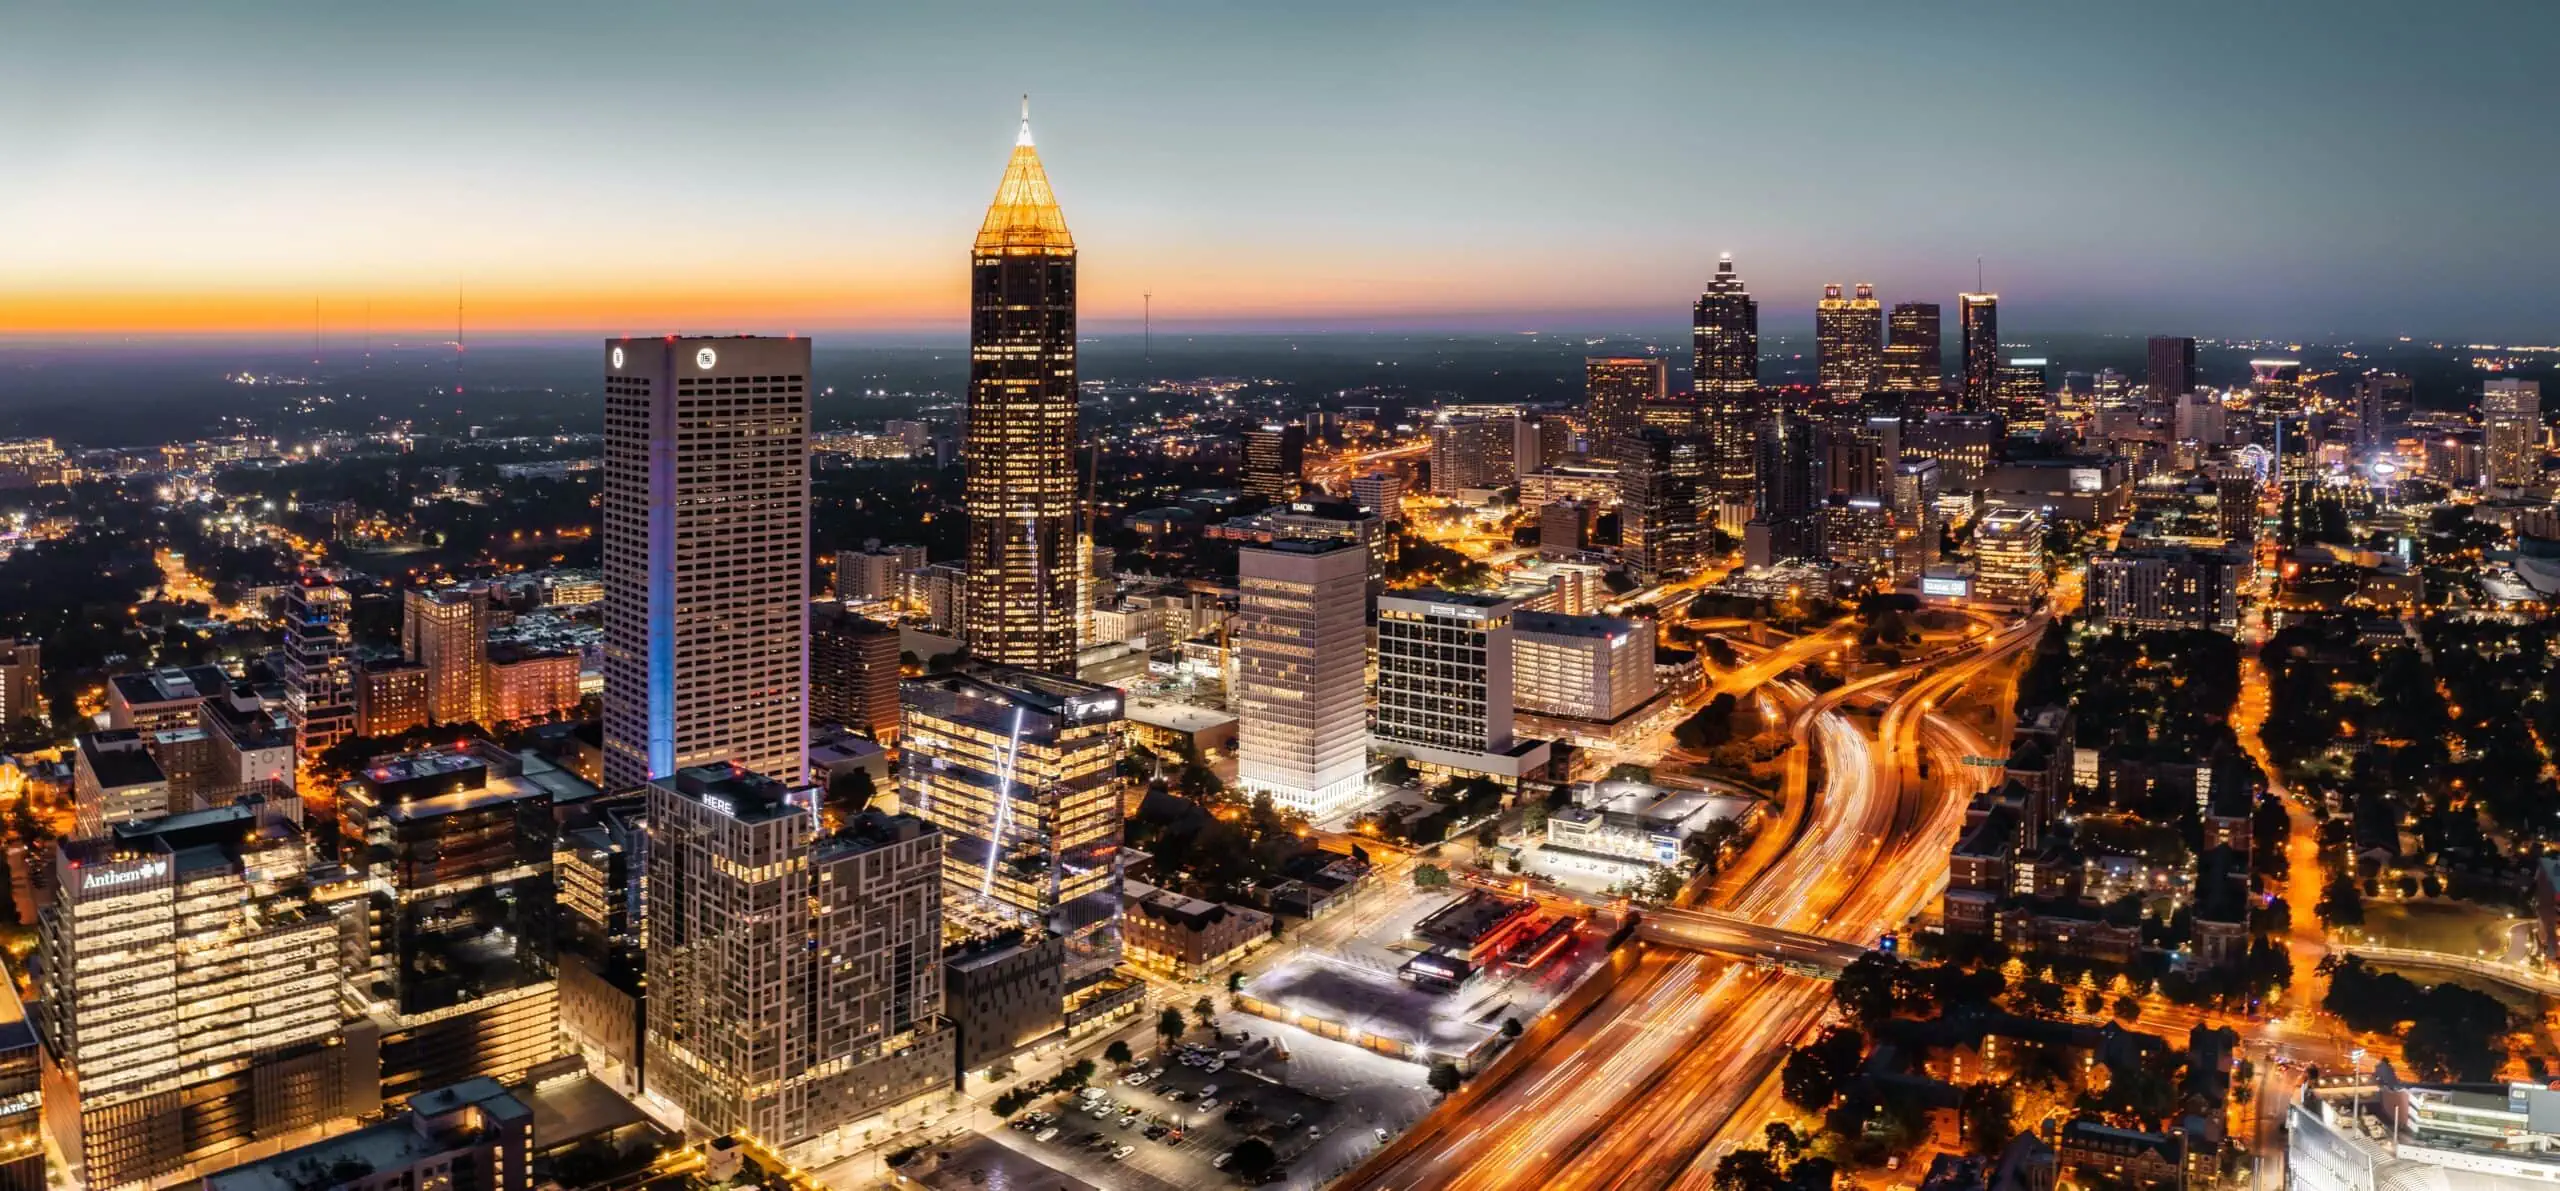 Skyline of Atlanta with businesses equipped with surveillance cameras